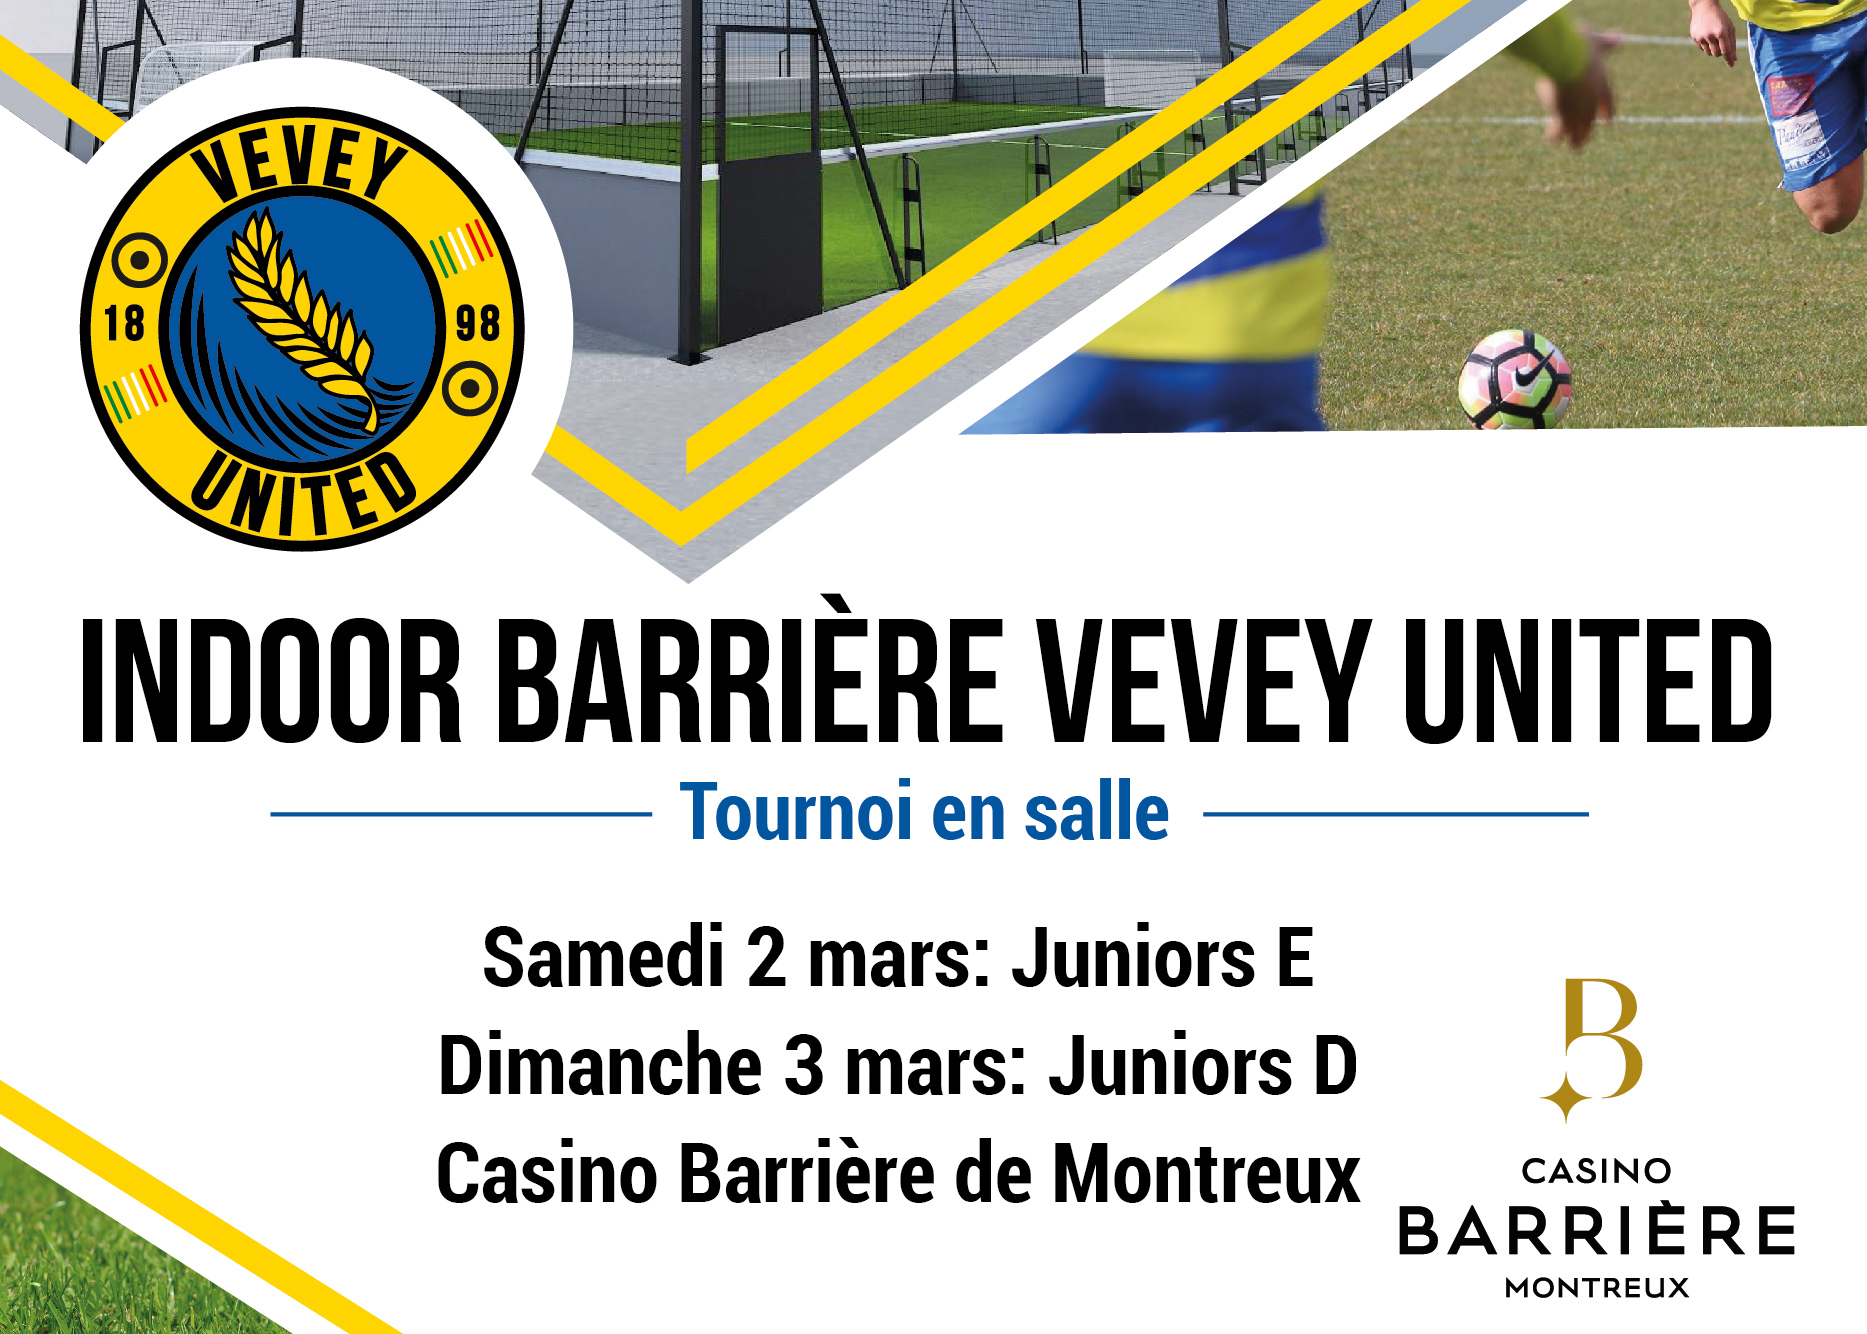 Indoor Barriere Vevey United